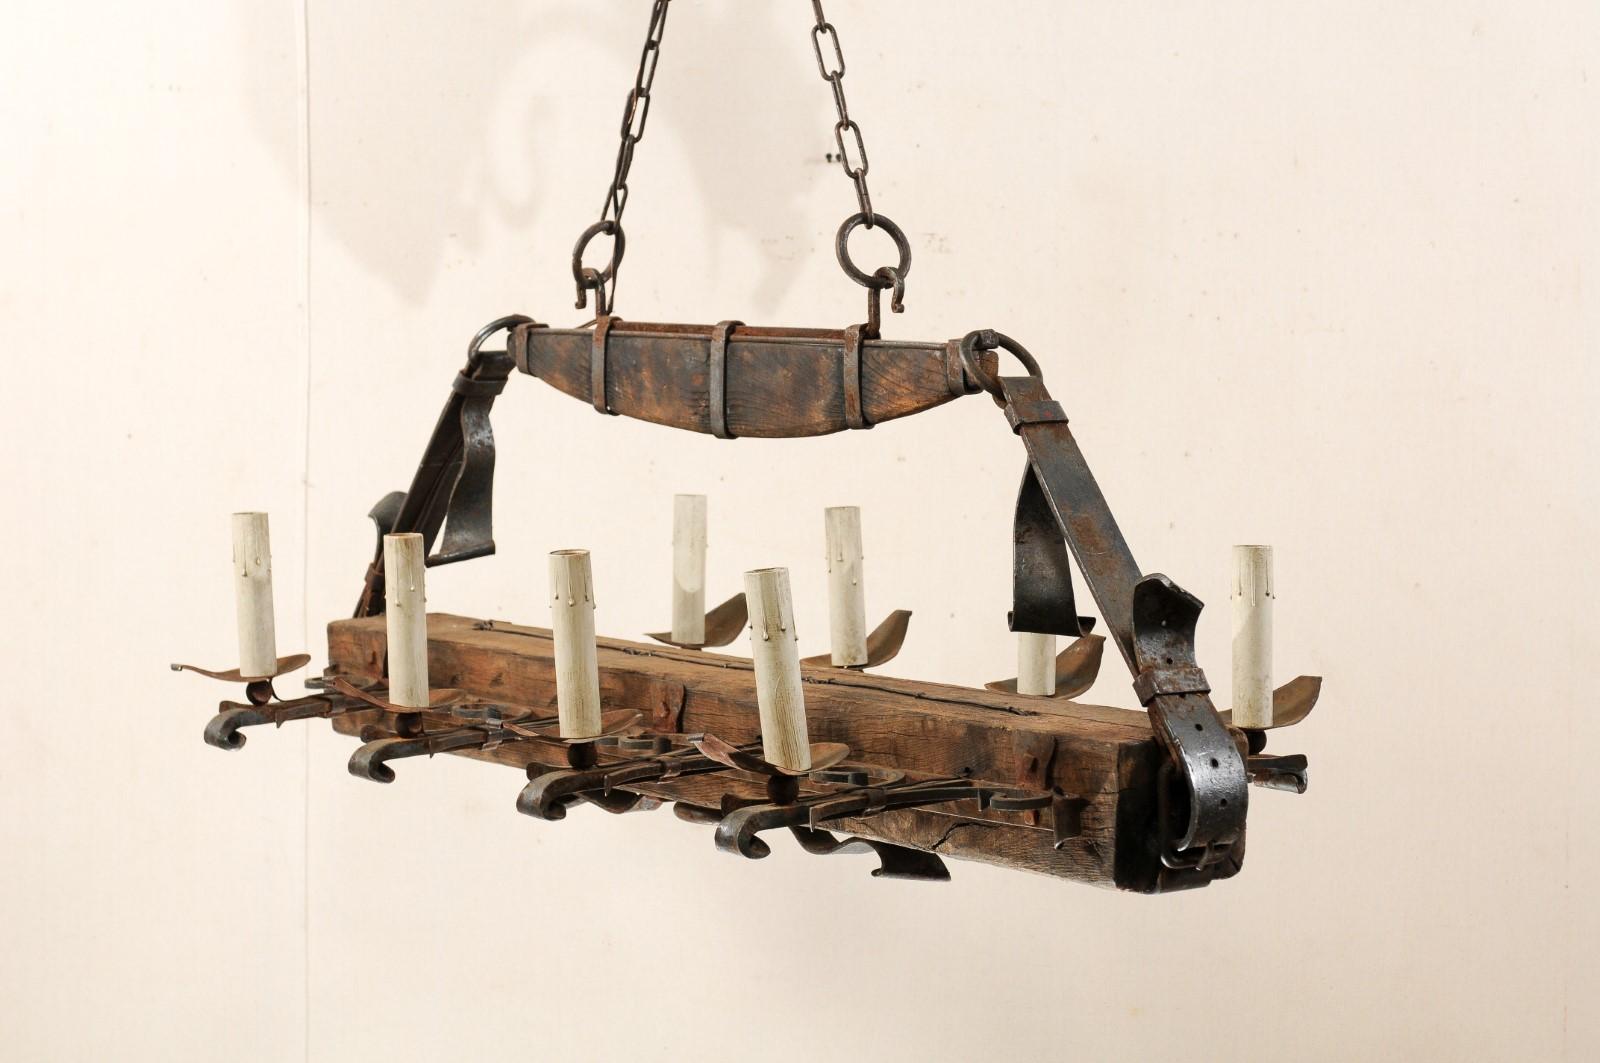 A French wooden beam and iron eight-light chandelier from the mid-20th century. This unusual vintage hanging light fixture from France features a rectangular-shaped, horizontally positioned wood beam which is wrapped and suspended to the upper